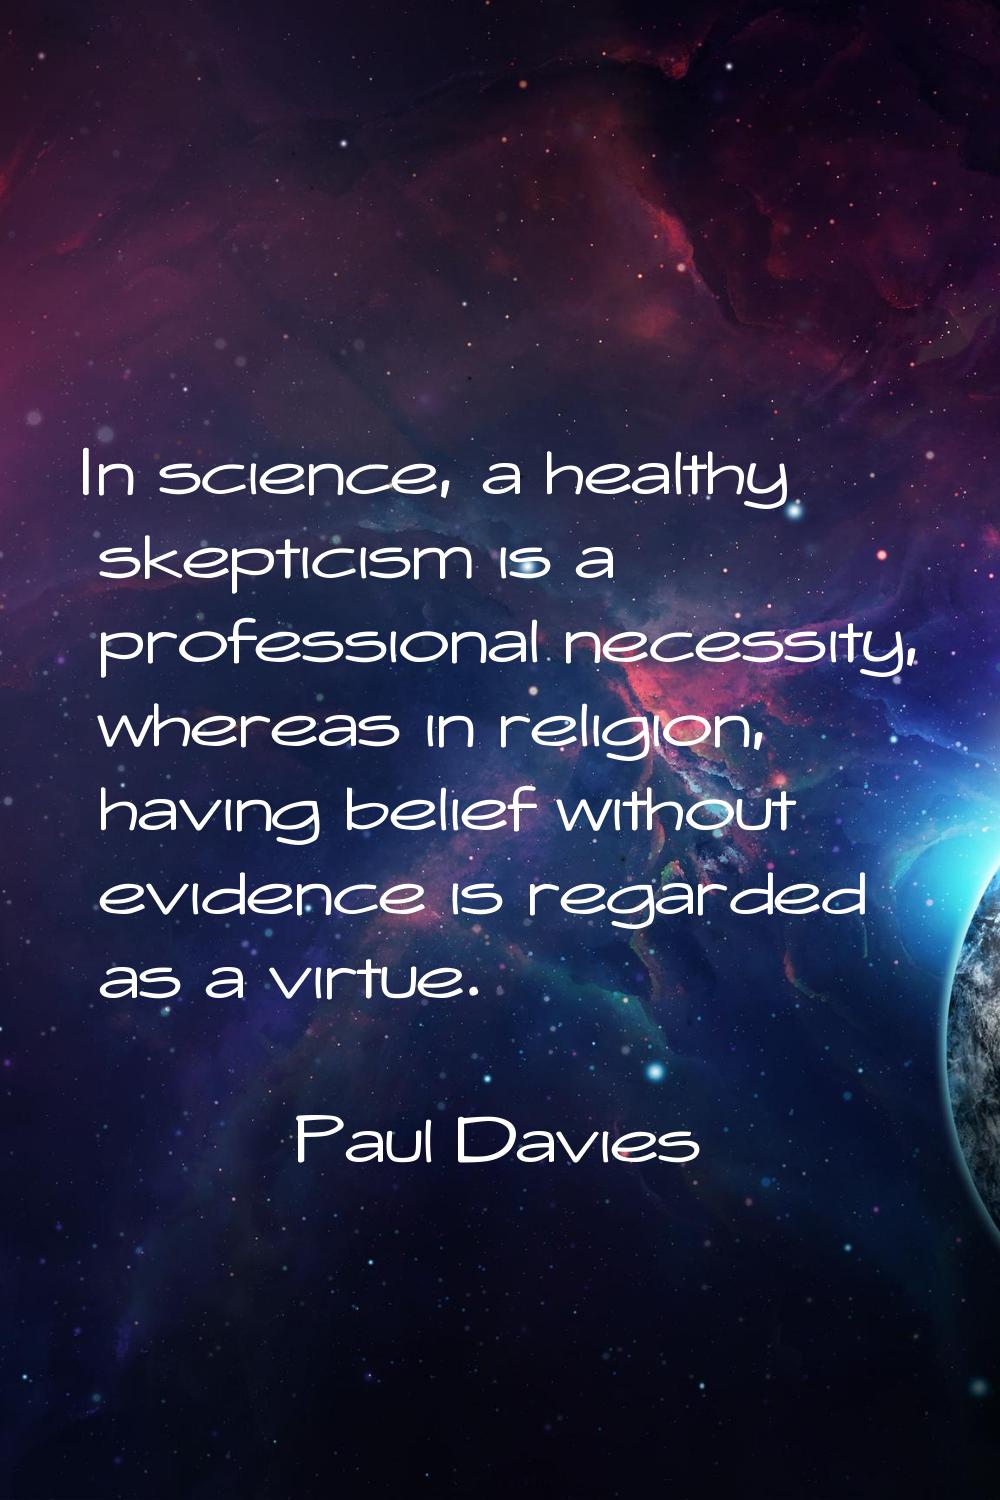 In science, a healthy skepticism is a professional necessity, whereas in religion, having belief wi